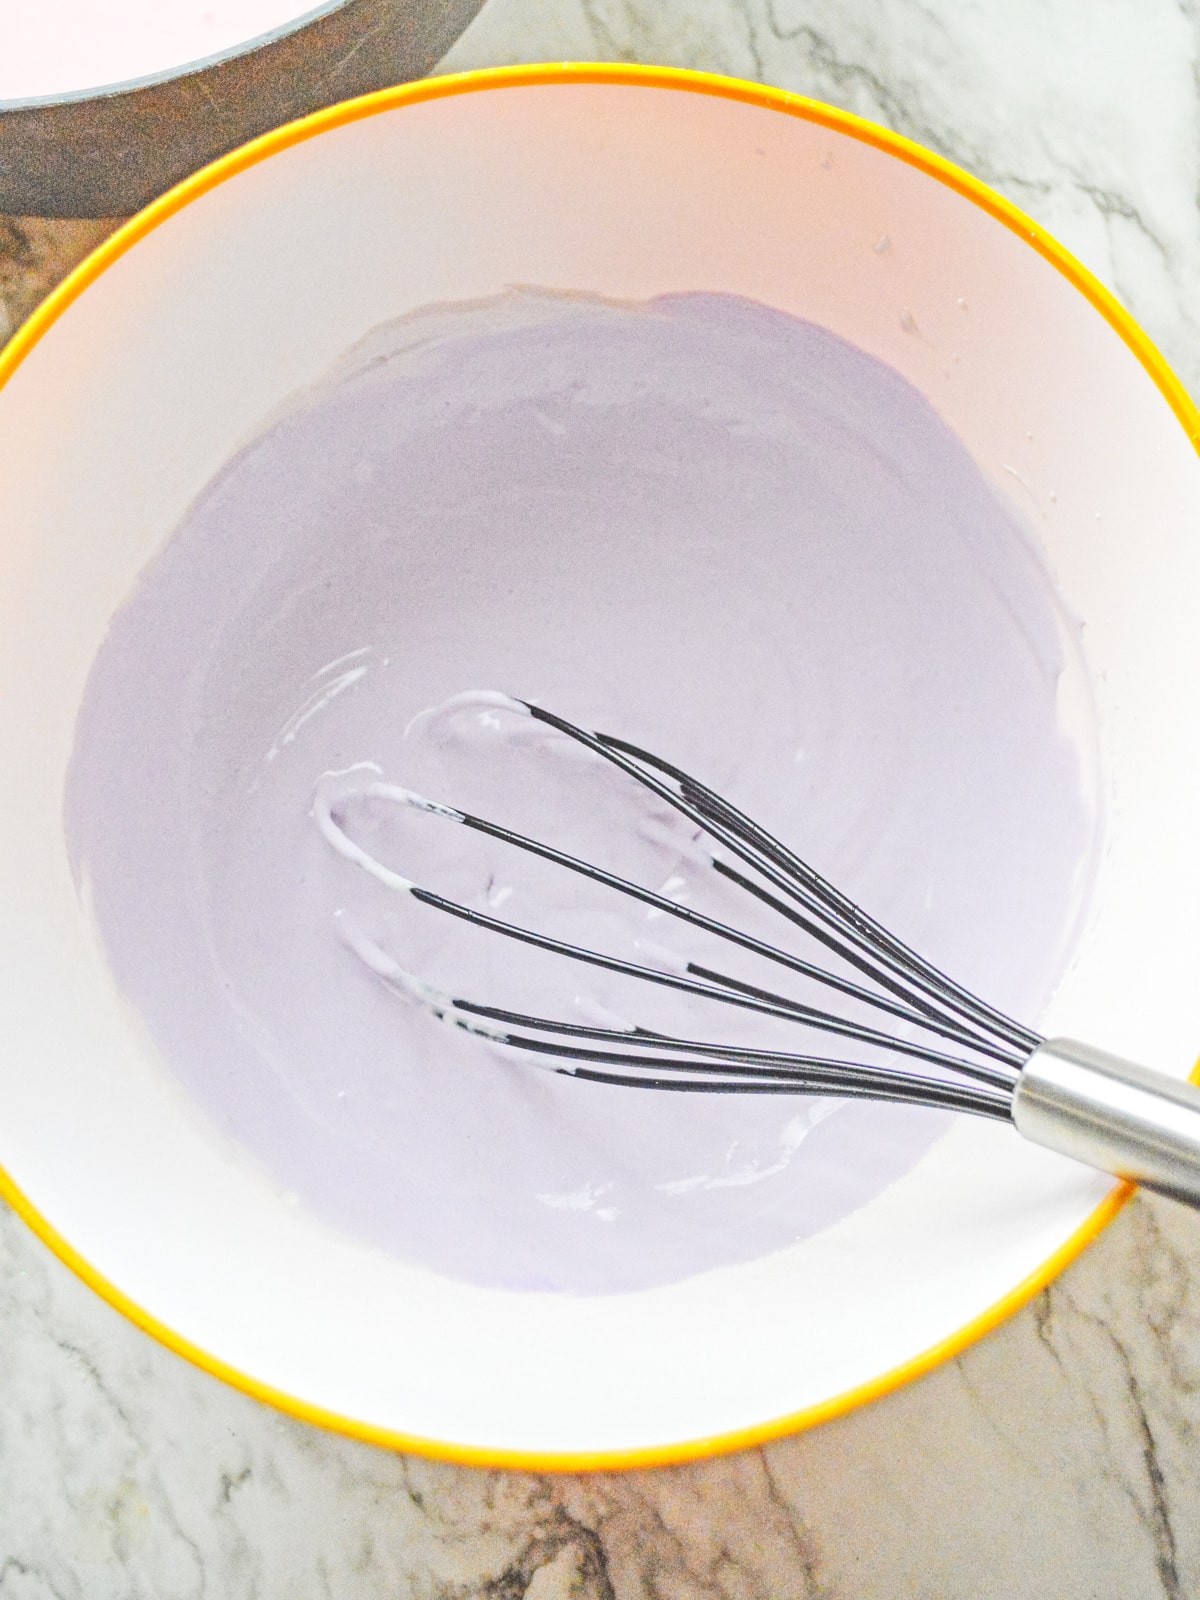 add purple food coloring to a third of the pudding